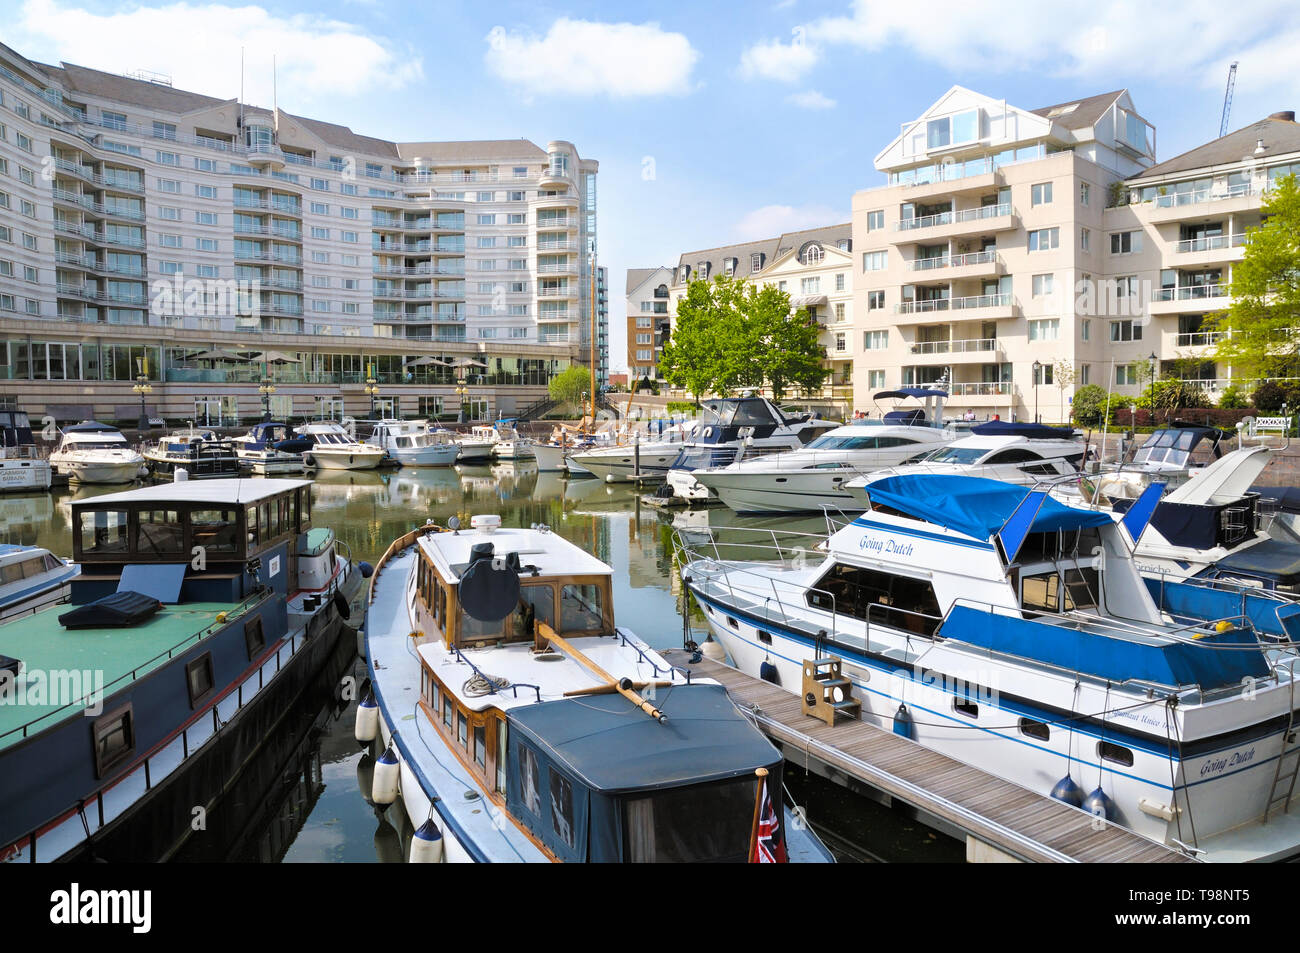 Chelsea Harbour, London, England, UK.  The Chelsea Harbour Hotel next to exclusive apartments overlooking the marina. Stock Photo